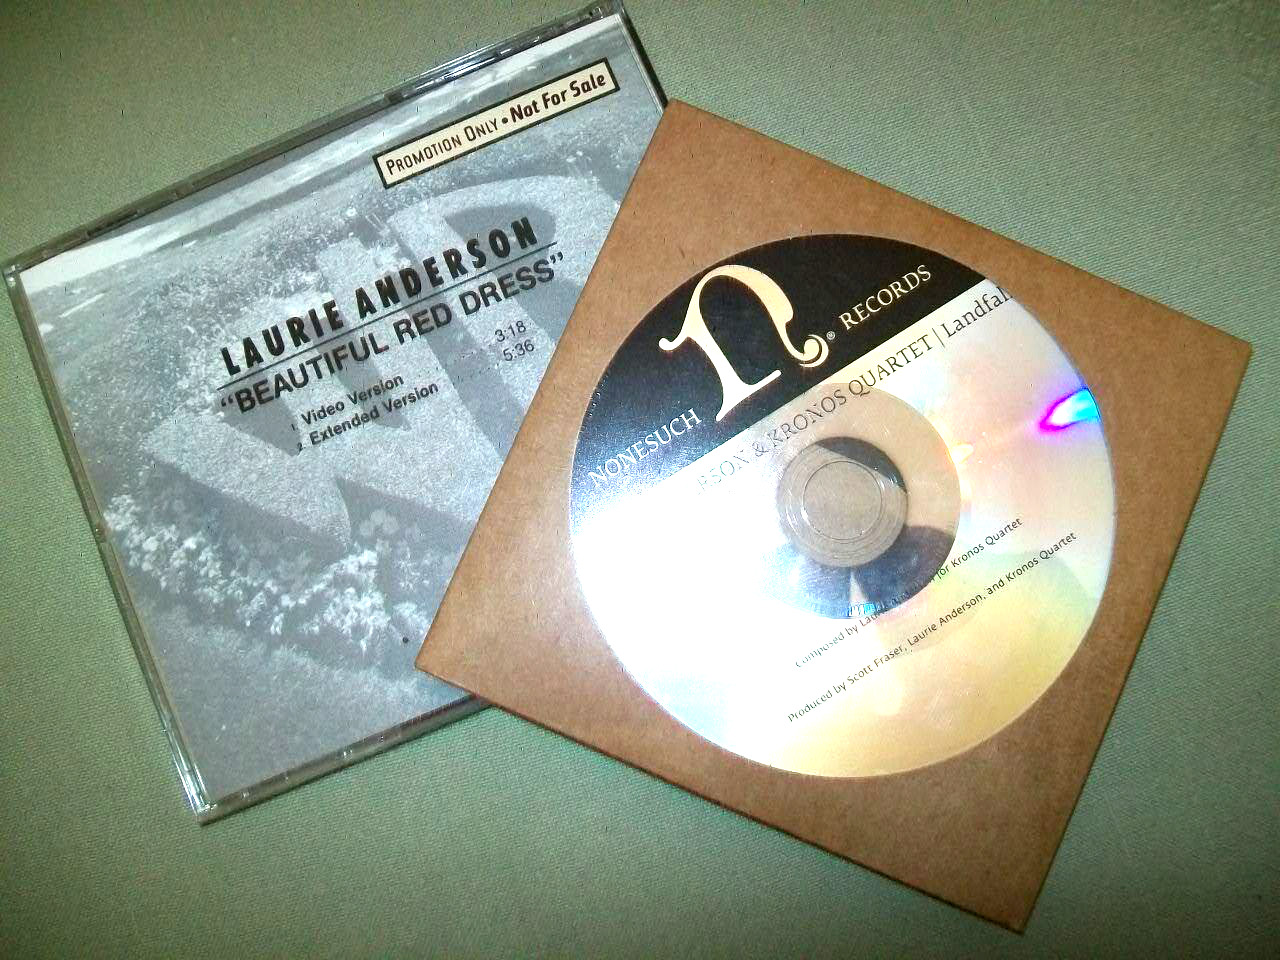 Laurie Anderson       ** PROMO CD LOT **      Landfall  --  Beautiful Red Dress